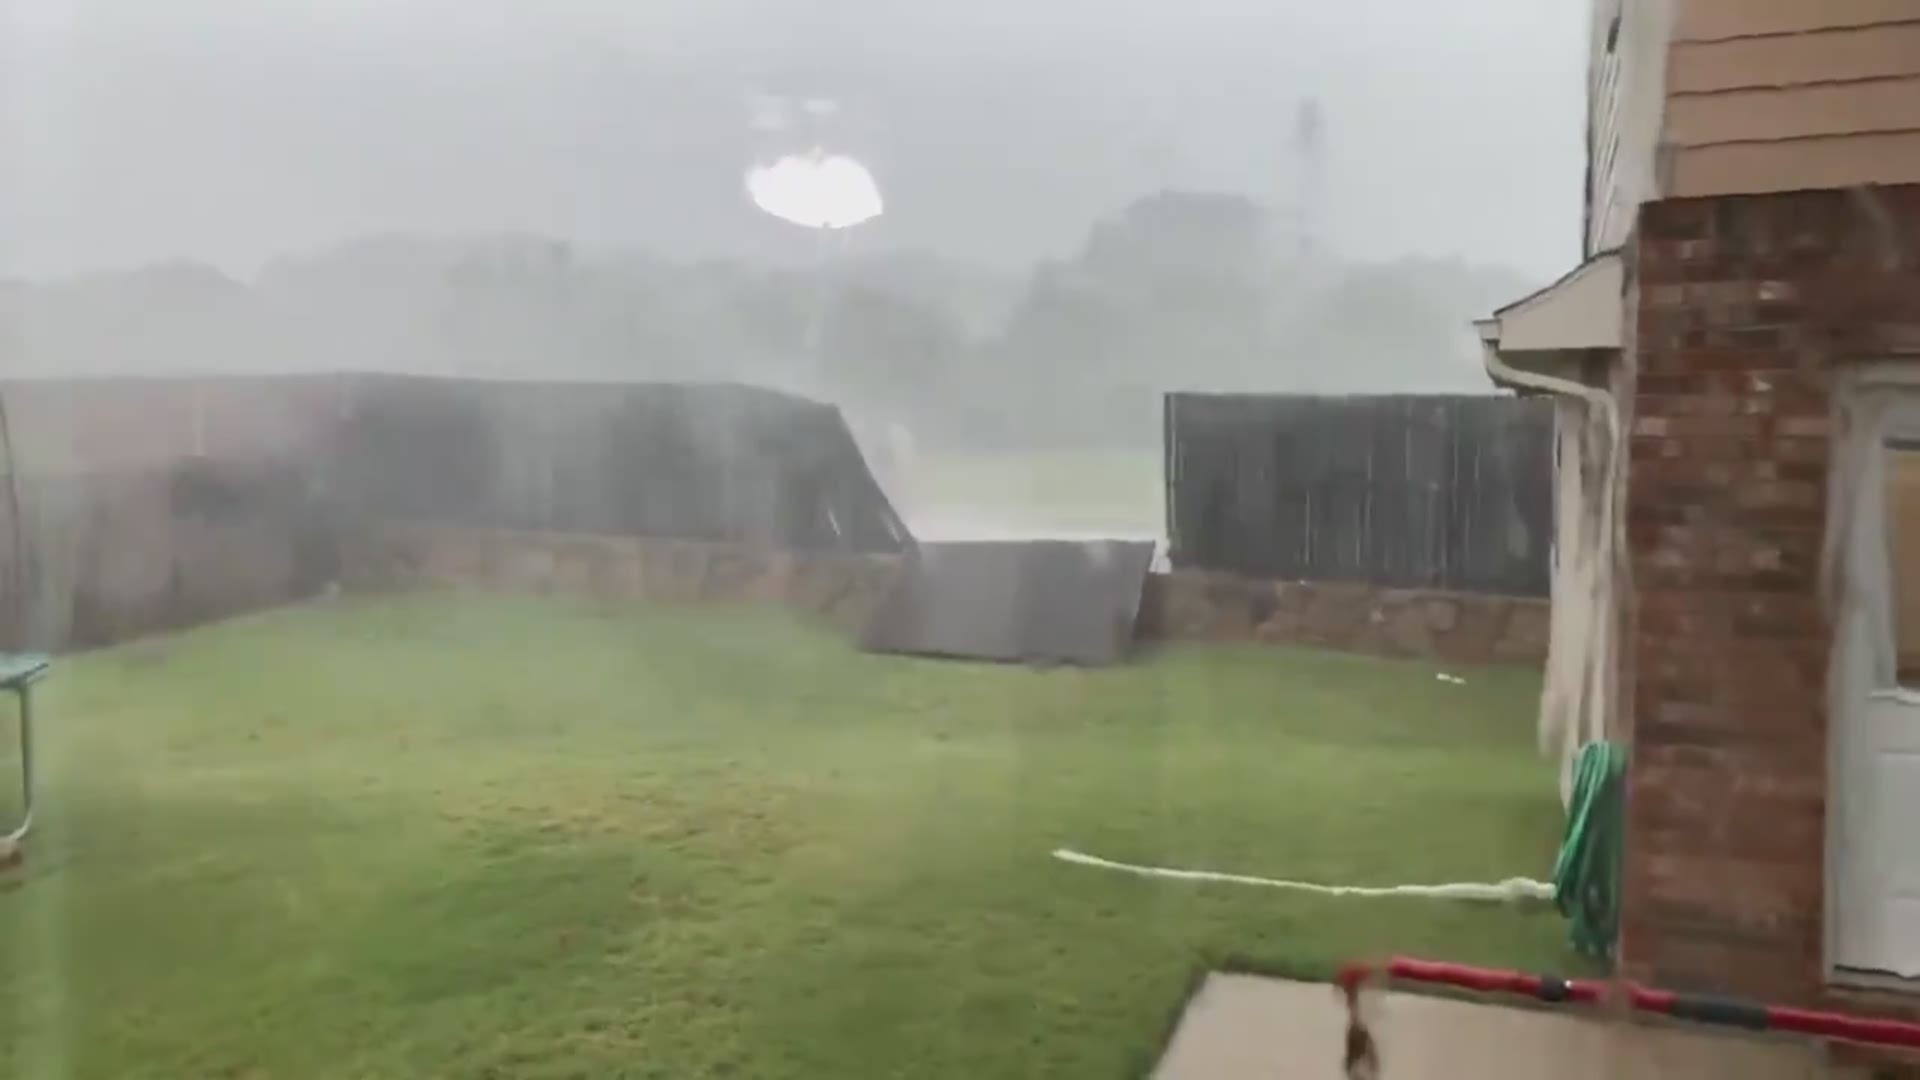 Viewer Matt Kotter sent us this video of storm damage at a house in Fort Worth.